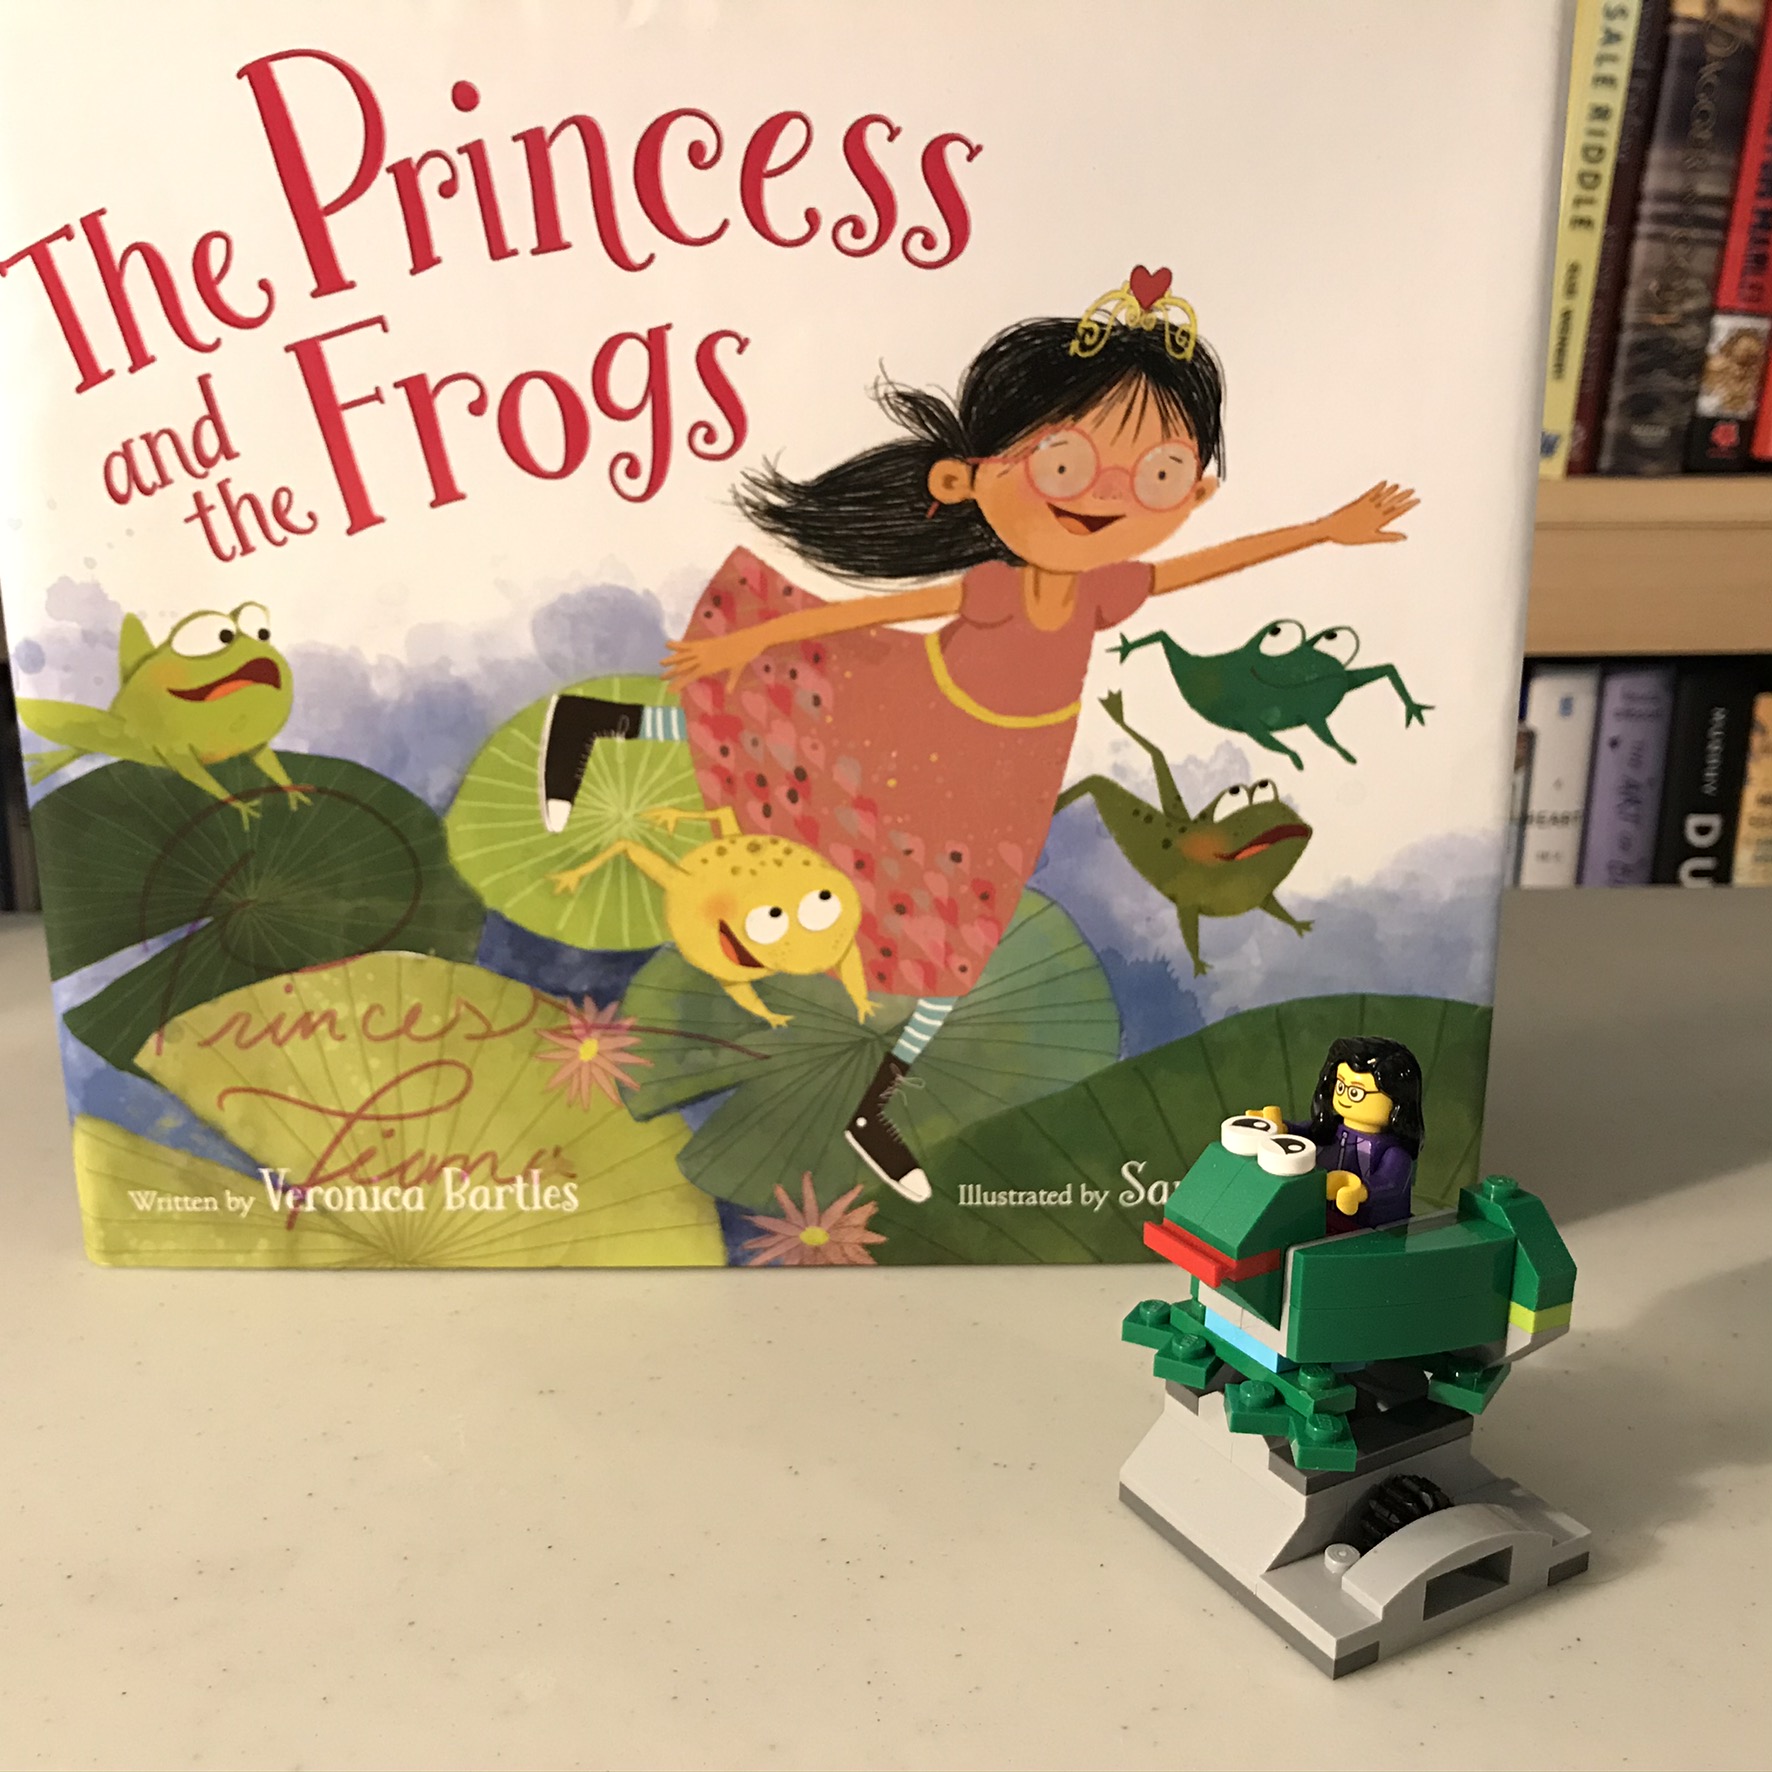 The Princess and the Frogs by Veronica Bartles - free hopping LEGO frog instructions